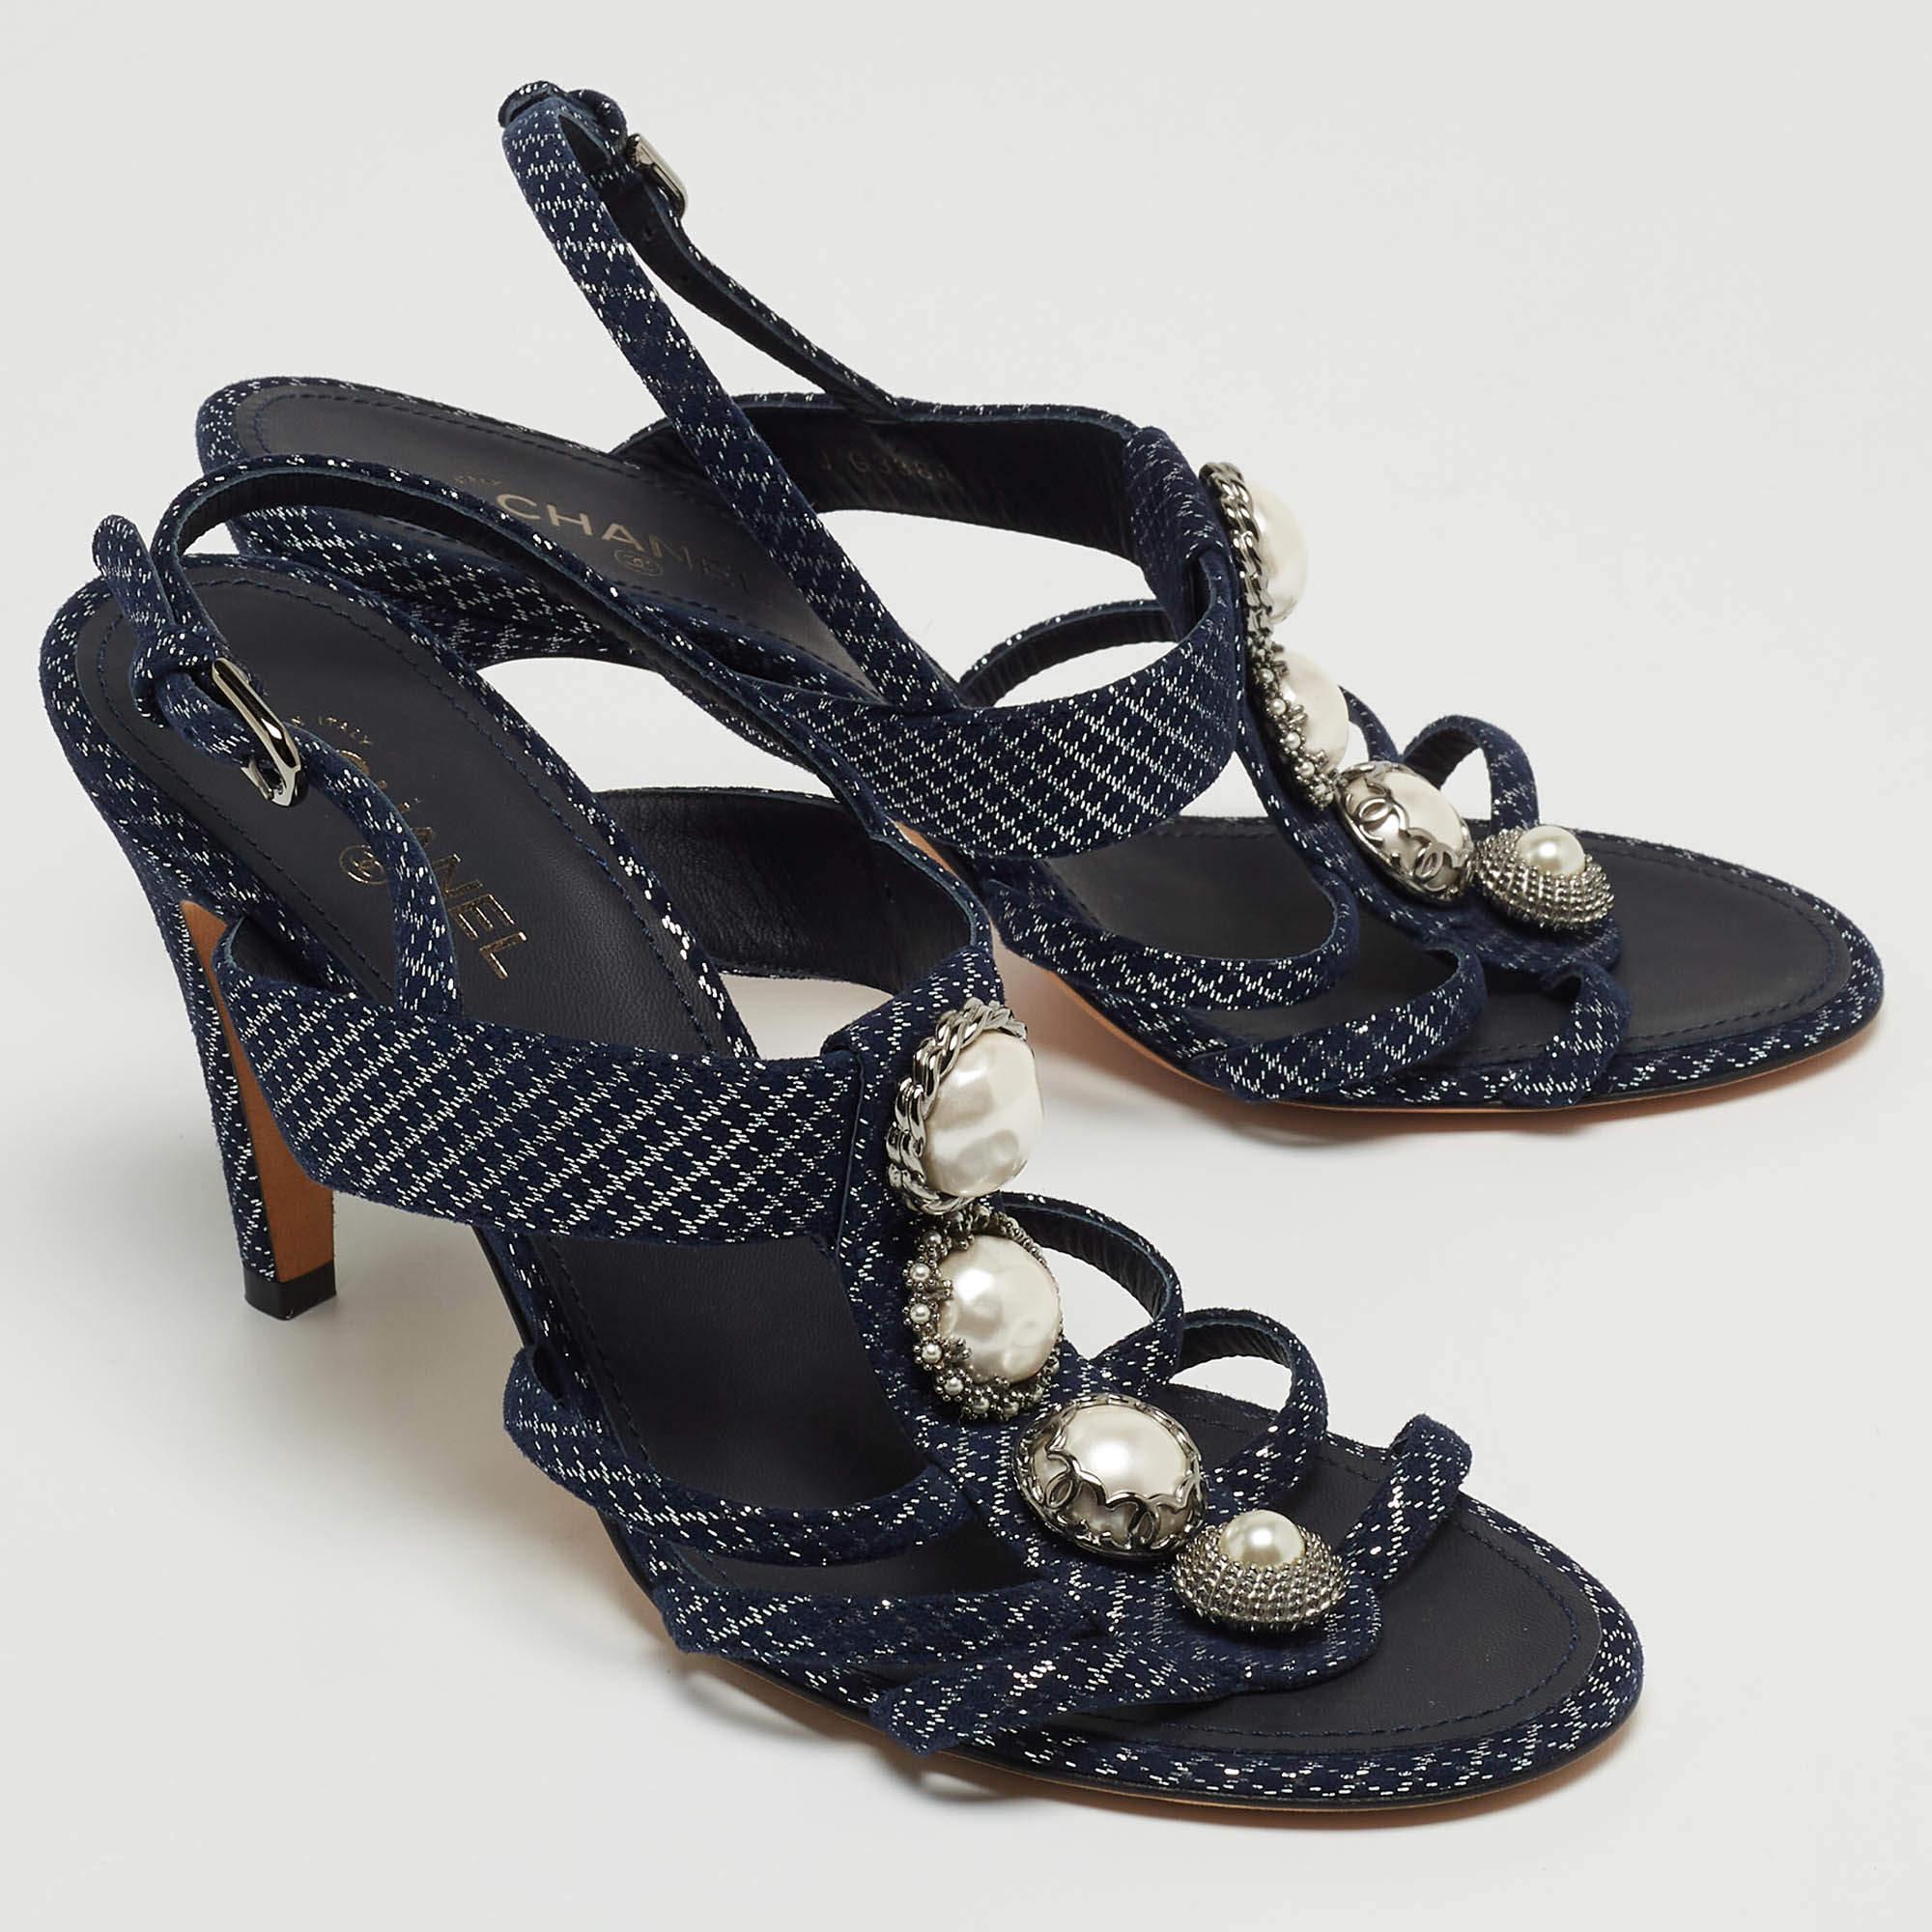 Chanel Navy Blue Textured Suede Faux Pearl Embellished Slingback Sandals Size 38 3